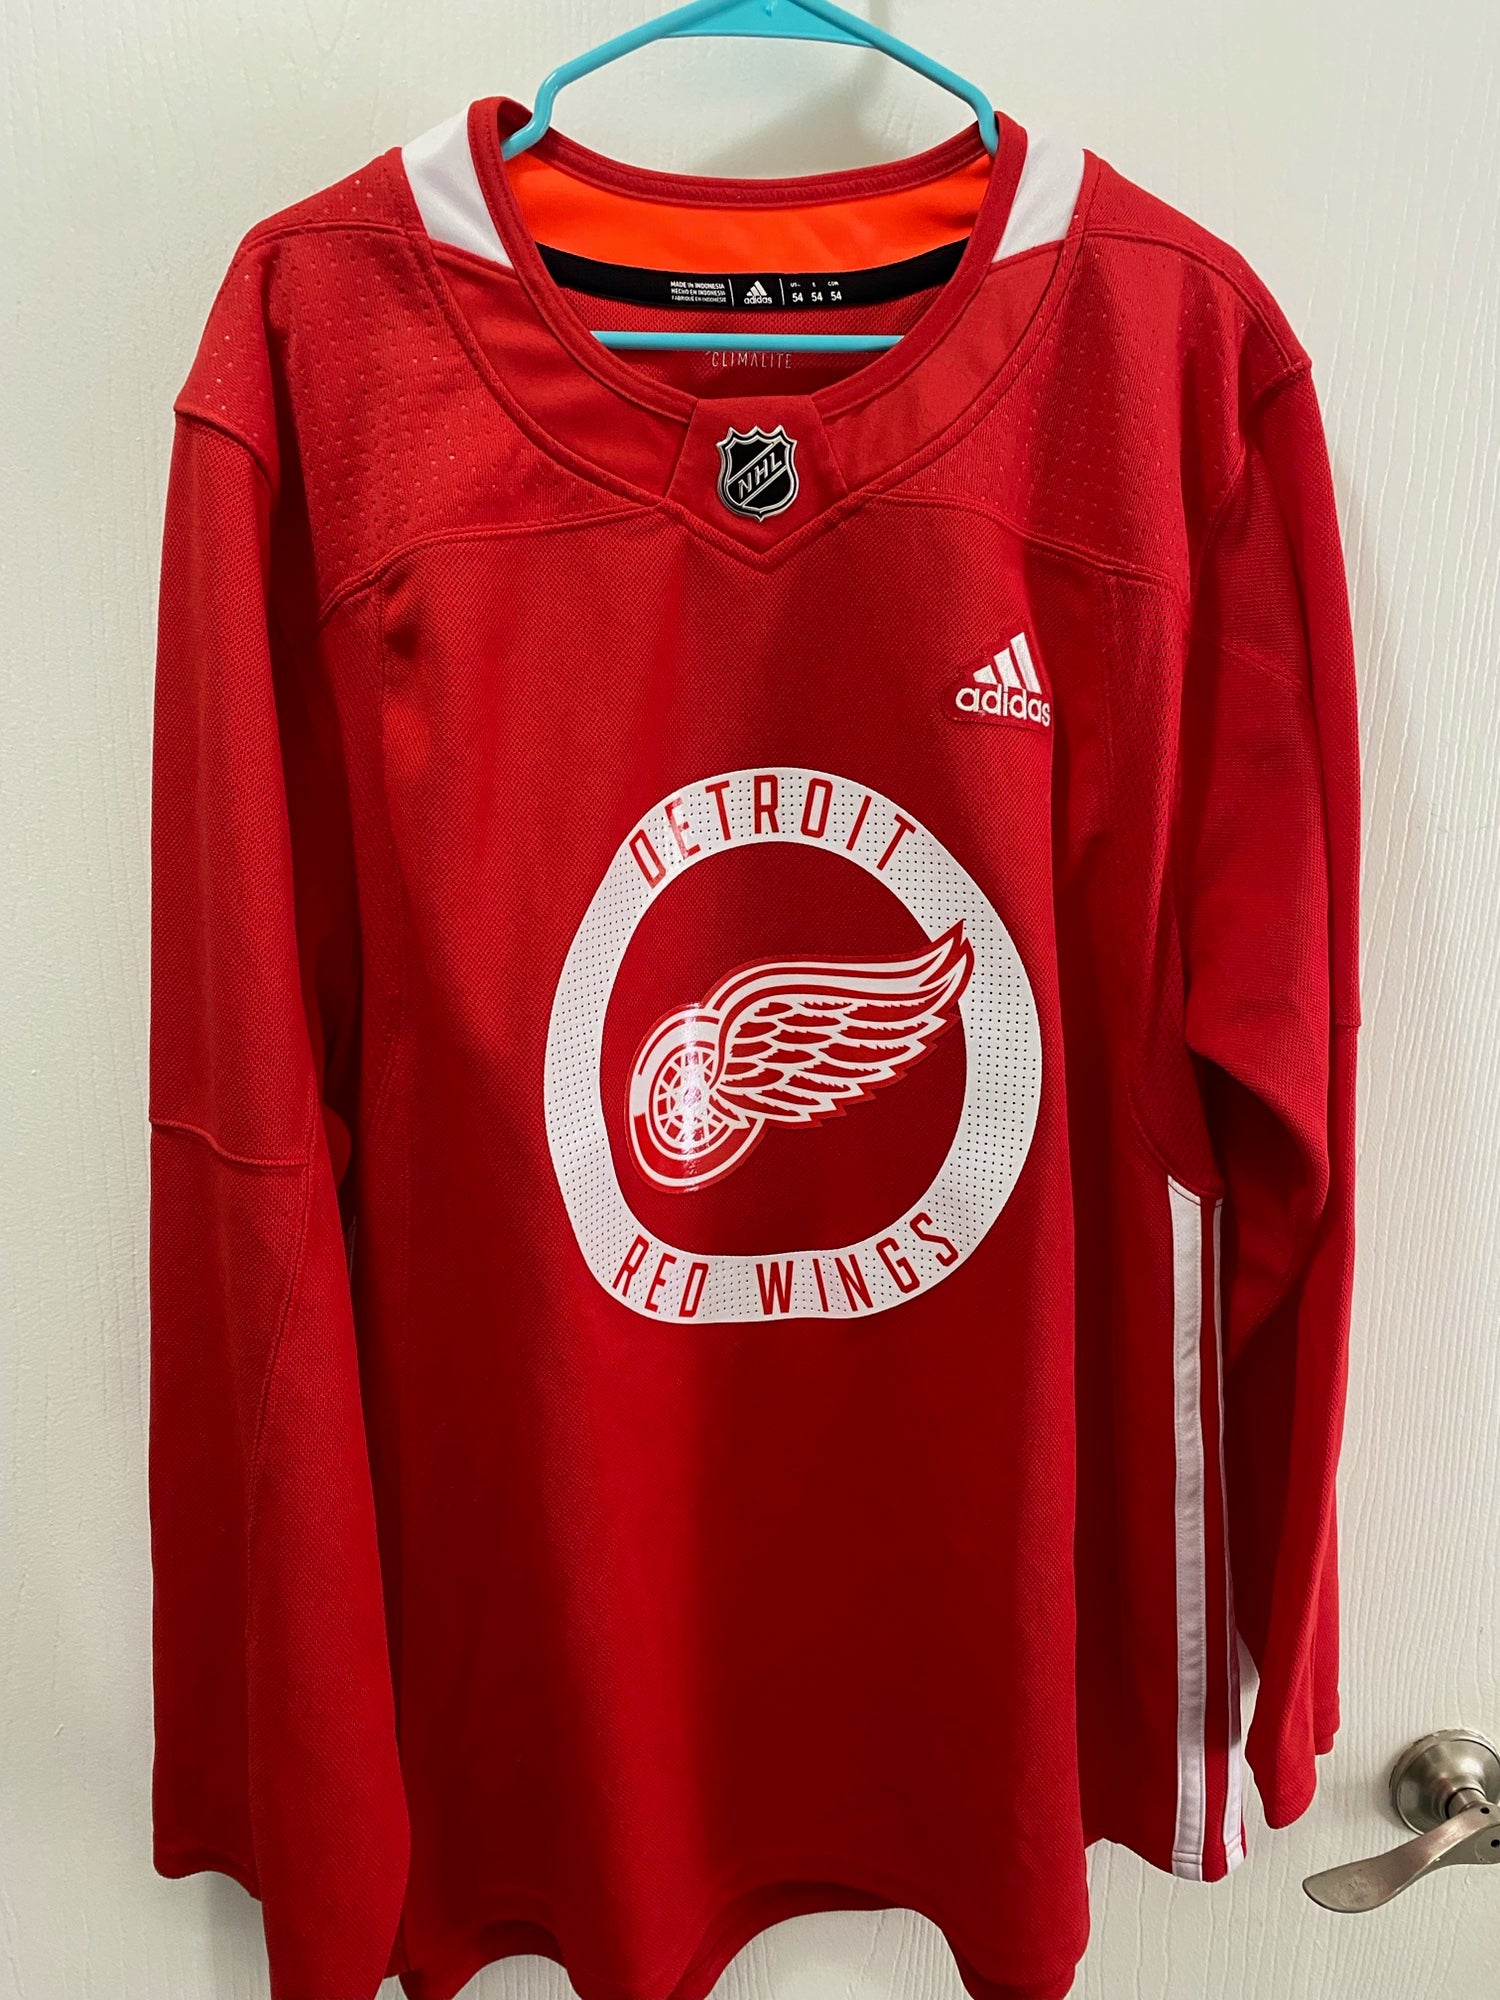 Reebok Authentic Detroit Red Wings Practice jersey